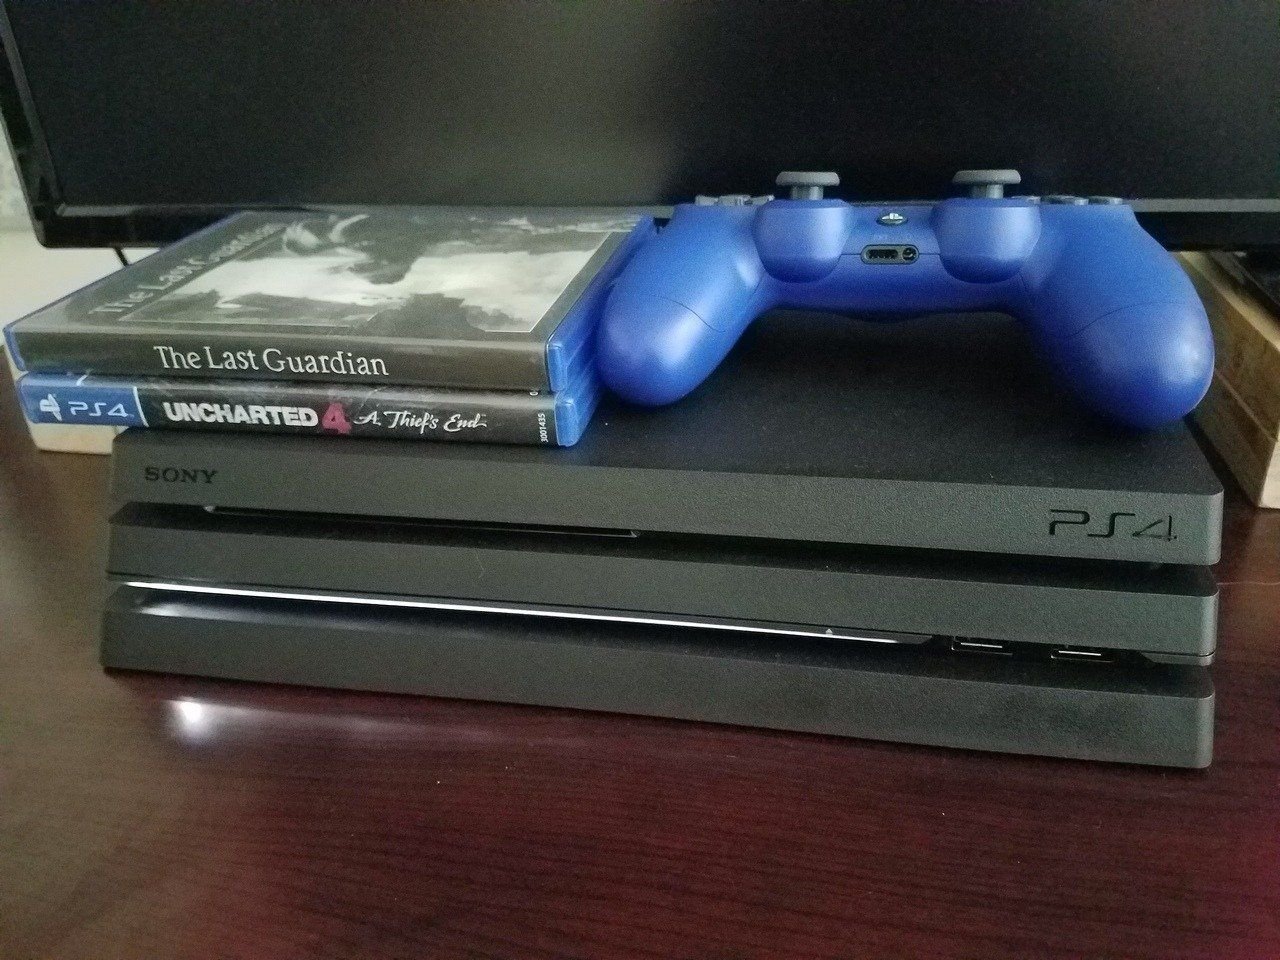 What should I do when my PlayStation 4 Pro gets loud?